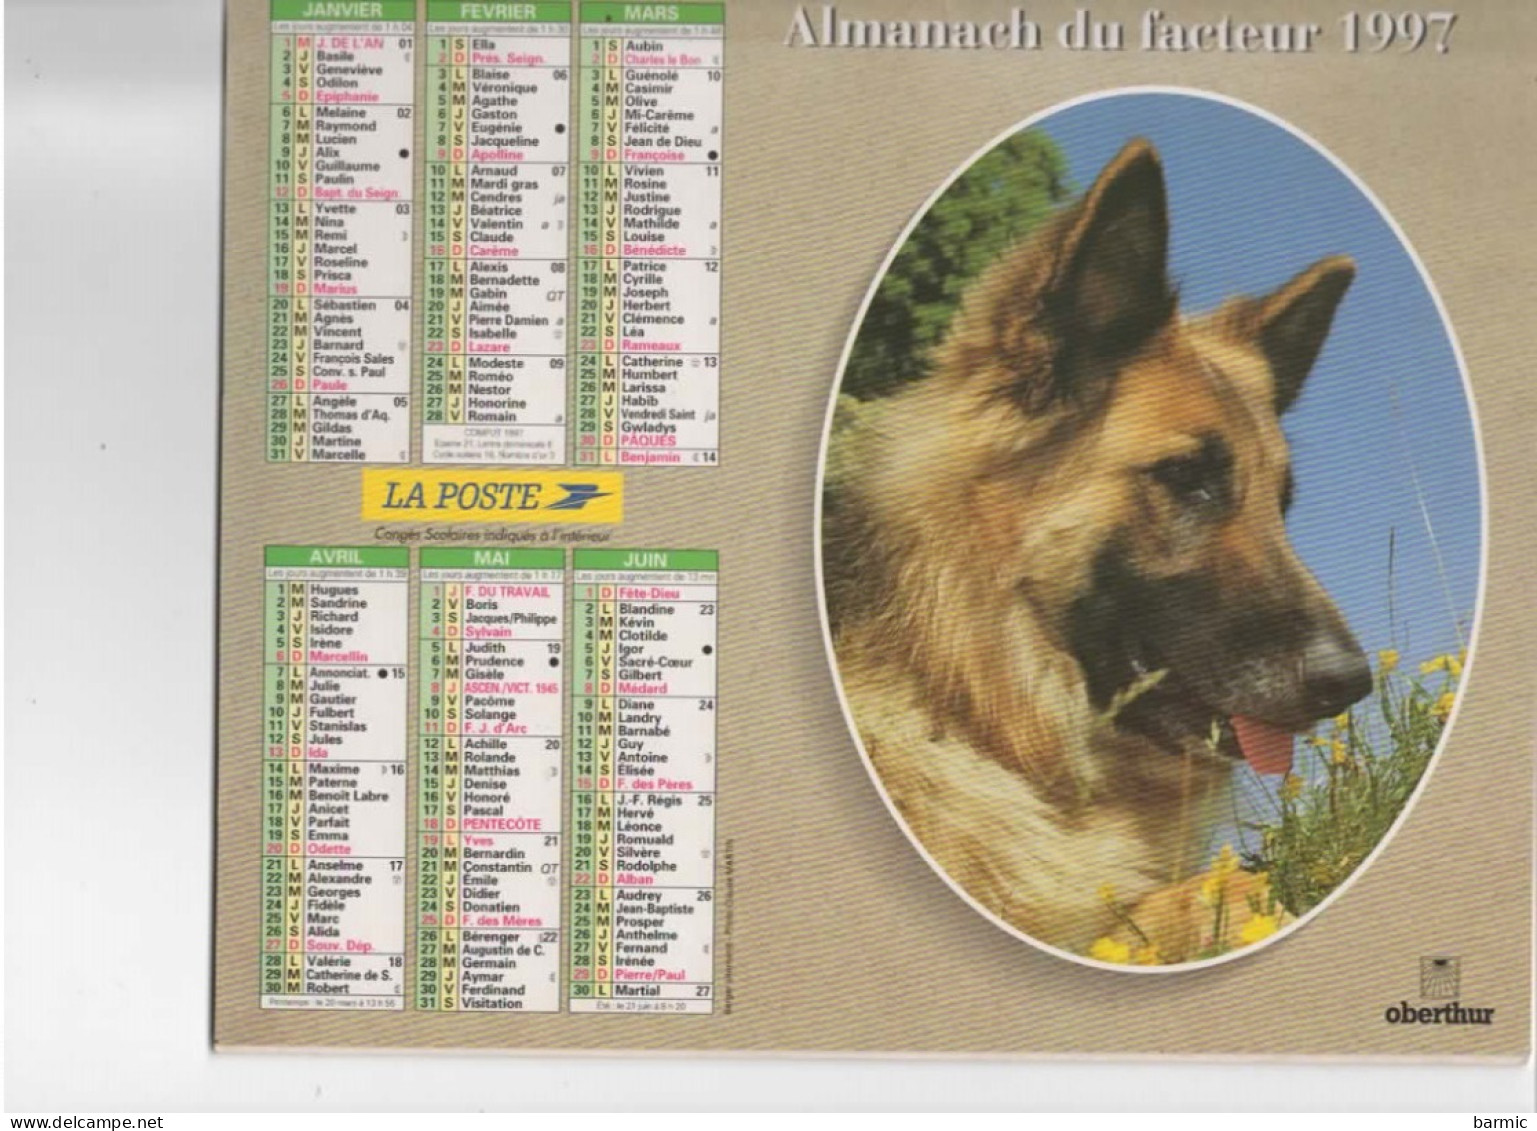 CALENDRIER ANNEE 1997, COMPLET, BERGER ALLEMAND, CHEVAL REF 13765 - Grand Format : 1991-00